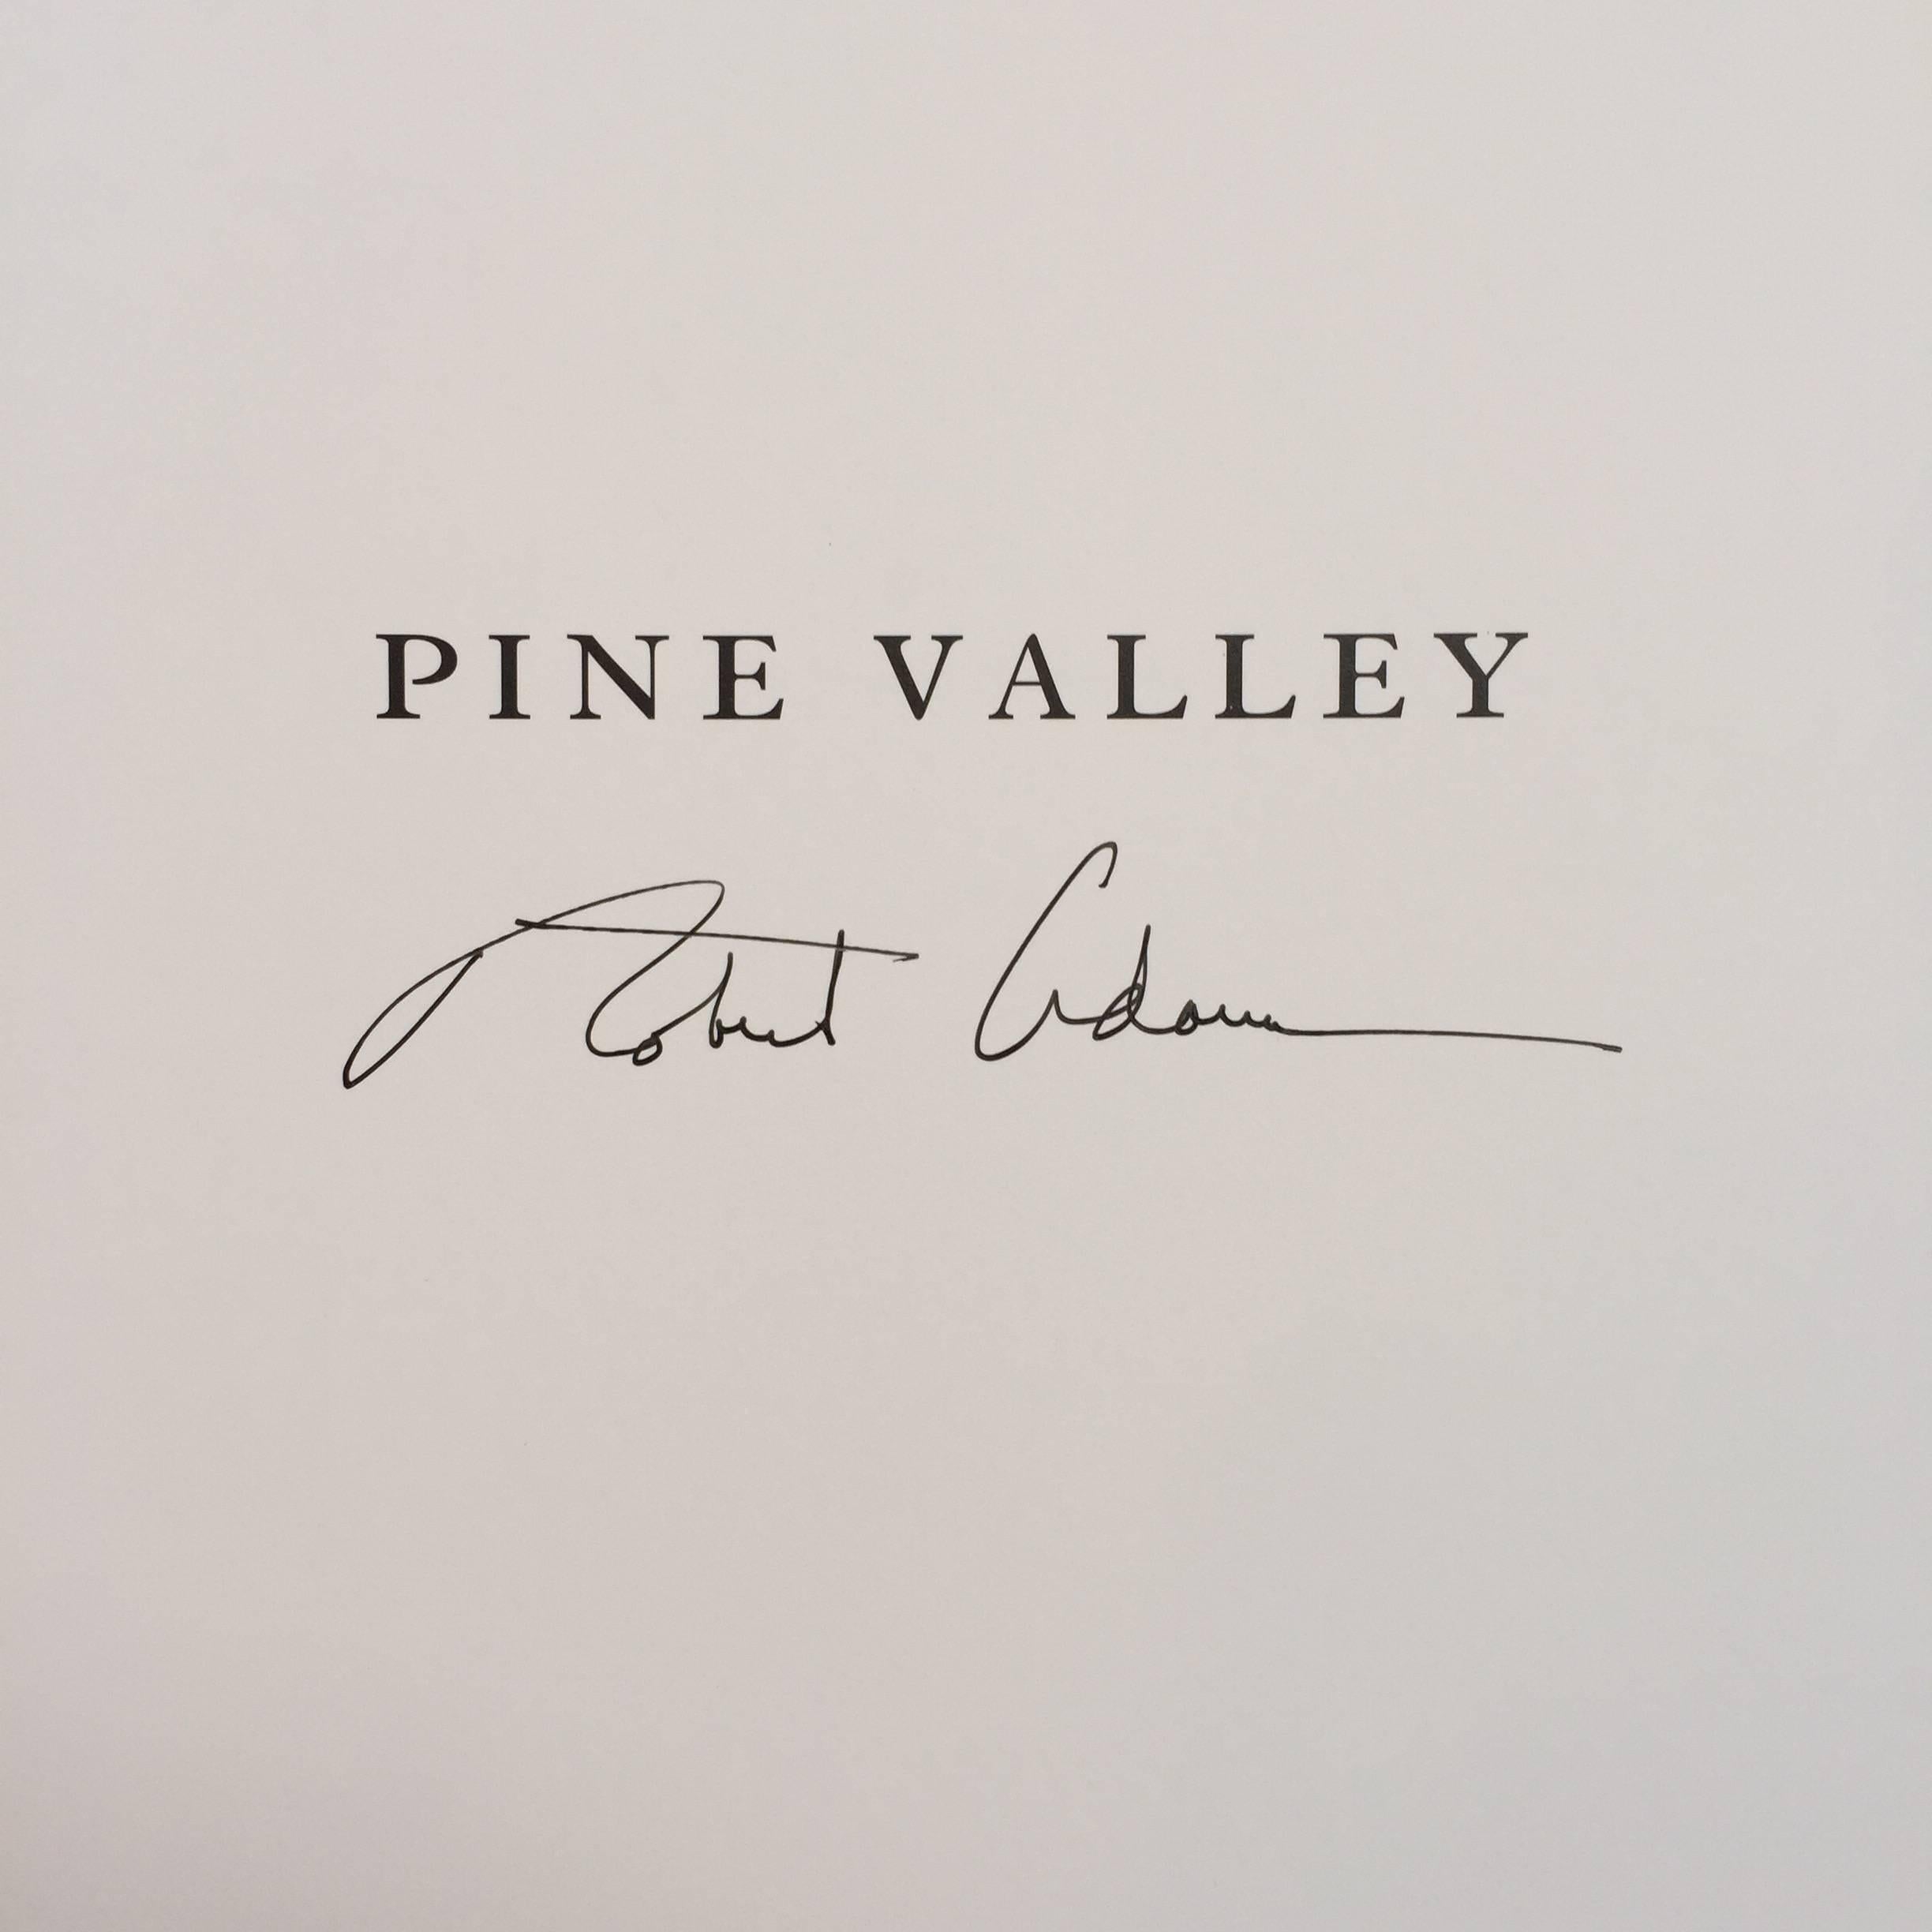 Signed First Edition, limited to 1000 copies, published by Nazraeli Press, 2005. Signed at Title Page by Robert Adams.

“The Valley is located next to Oregon’s high desert. Most of the pines for which it was named have been cut, but it is still an